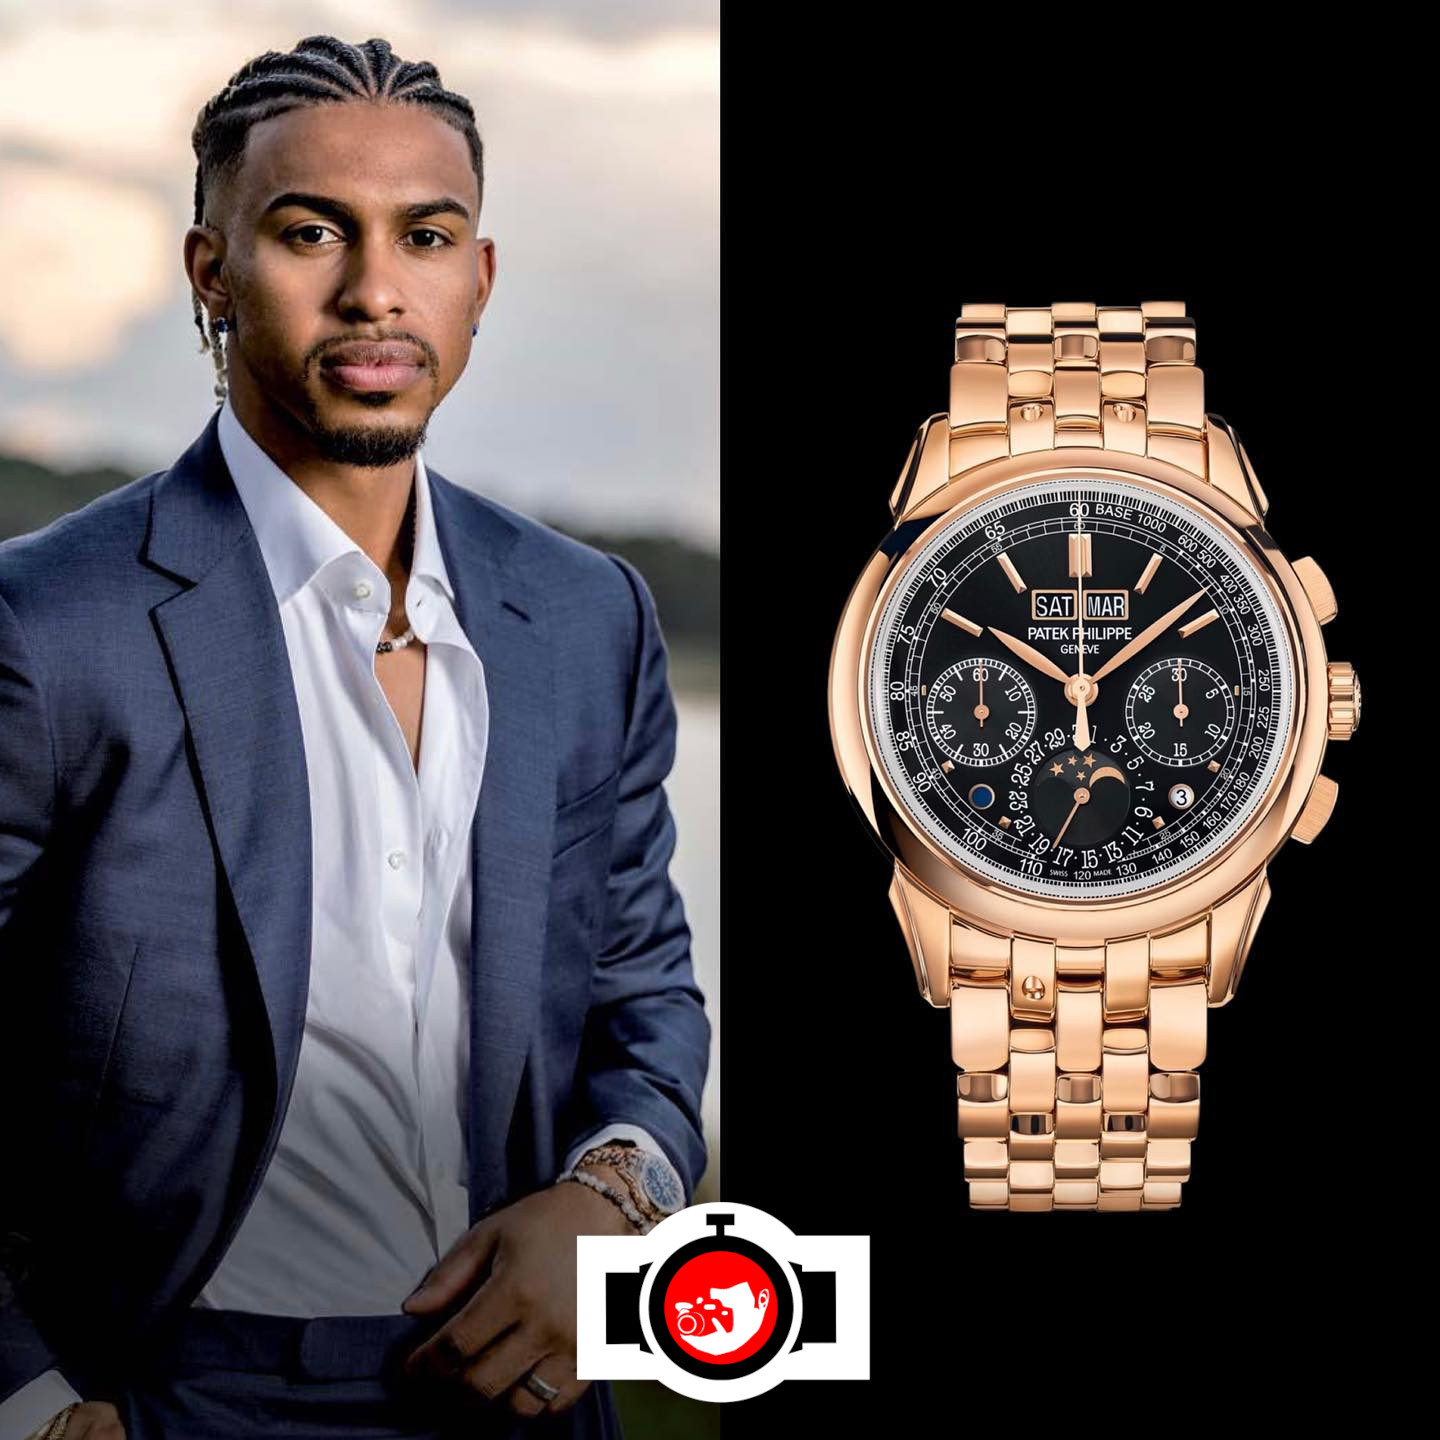 Francisco Lindor's Patek Philippe Watch Collection - A Glimpse Into Luxury Timepieces